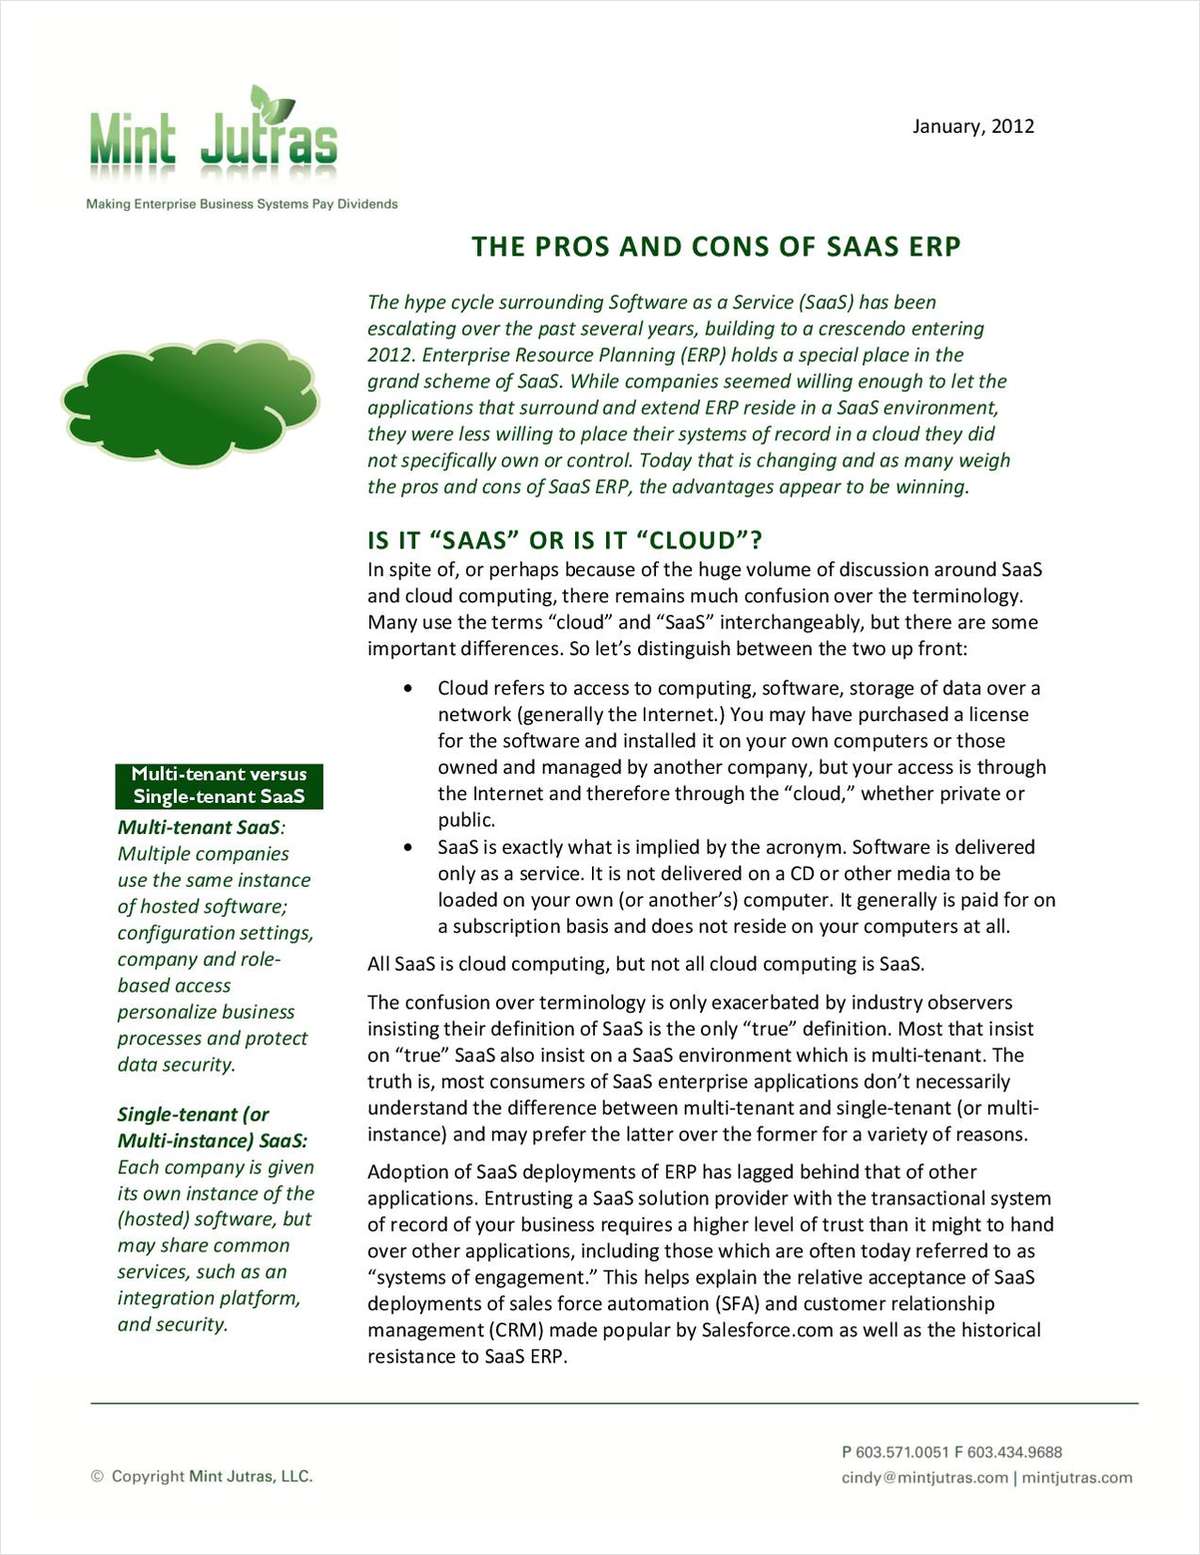 The Pros and Cons of SaaS ERP